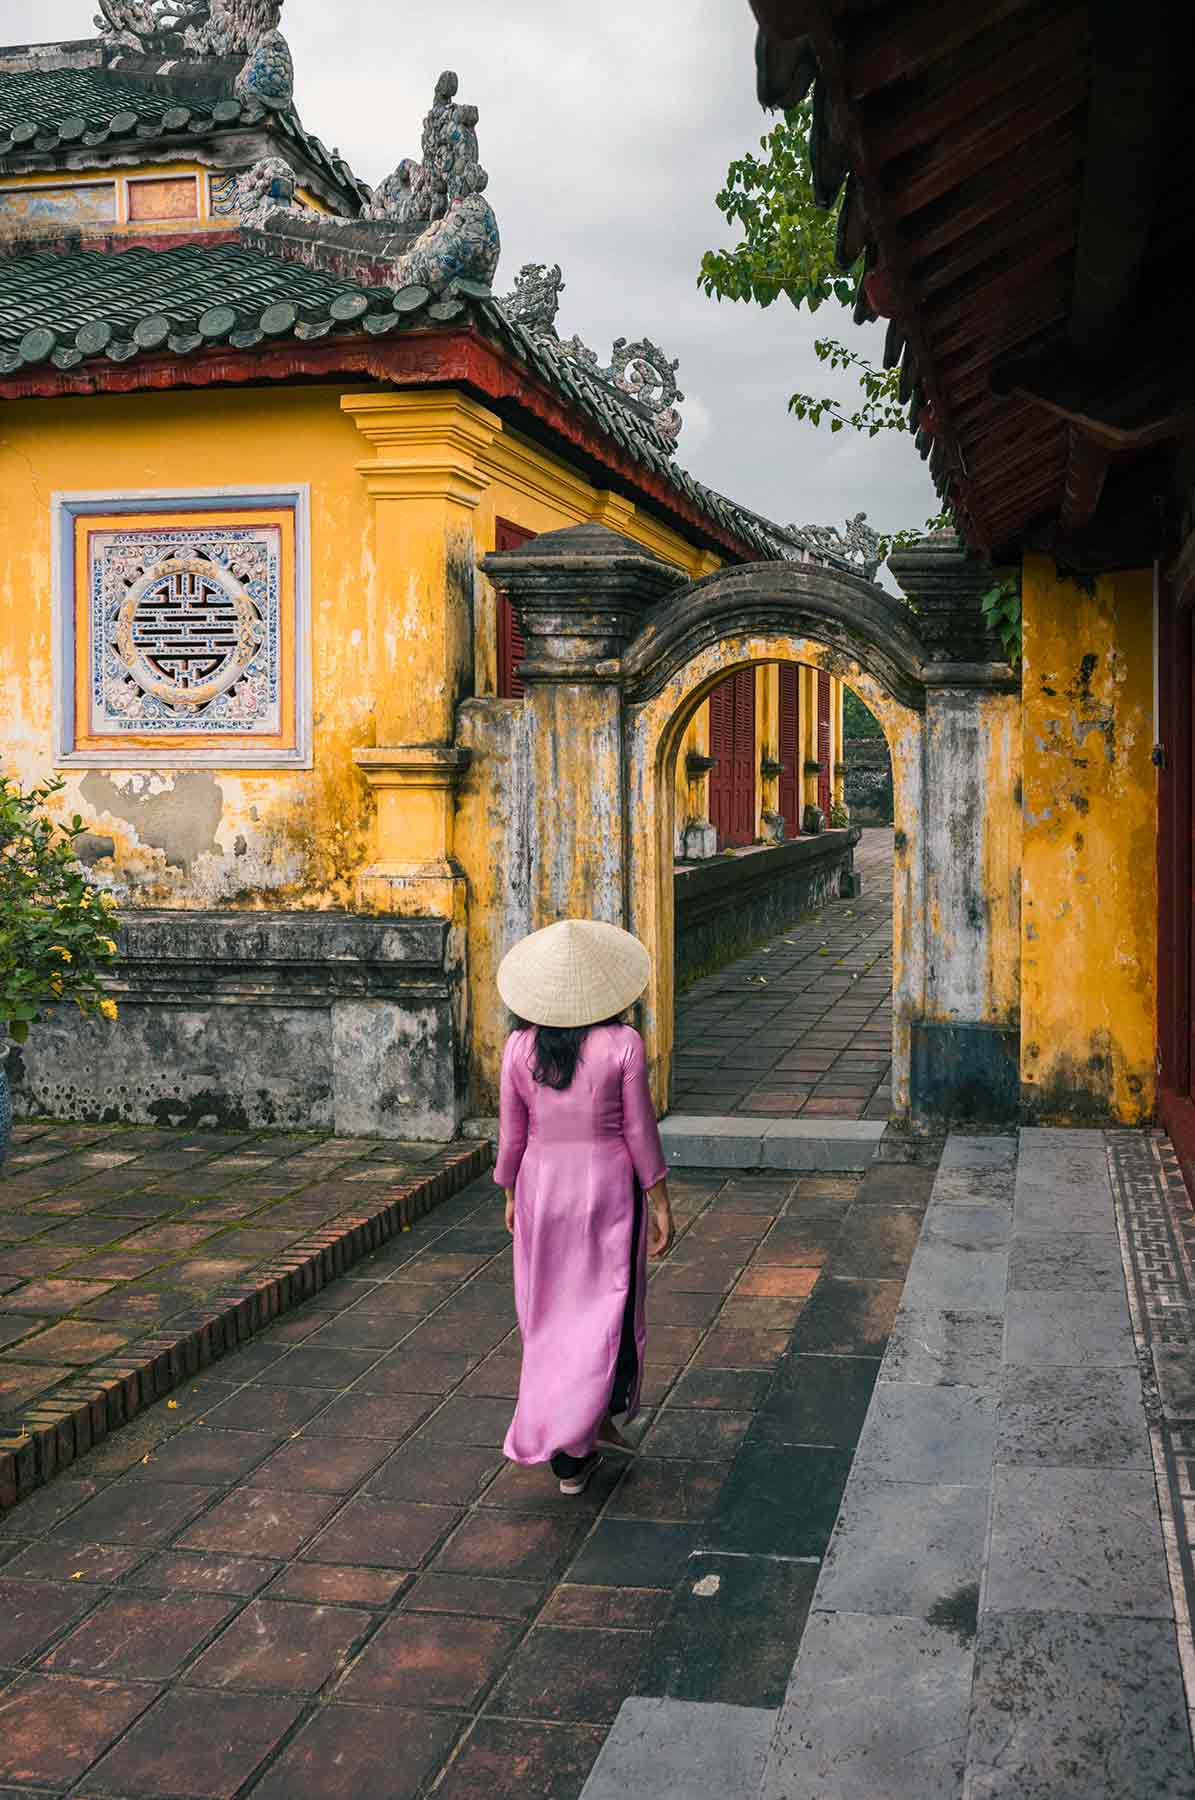 Woman in traditional Vietnamese attire walking towards historic yellow archways in Historic Old Imperial Citadel of Hue .